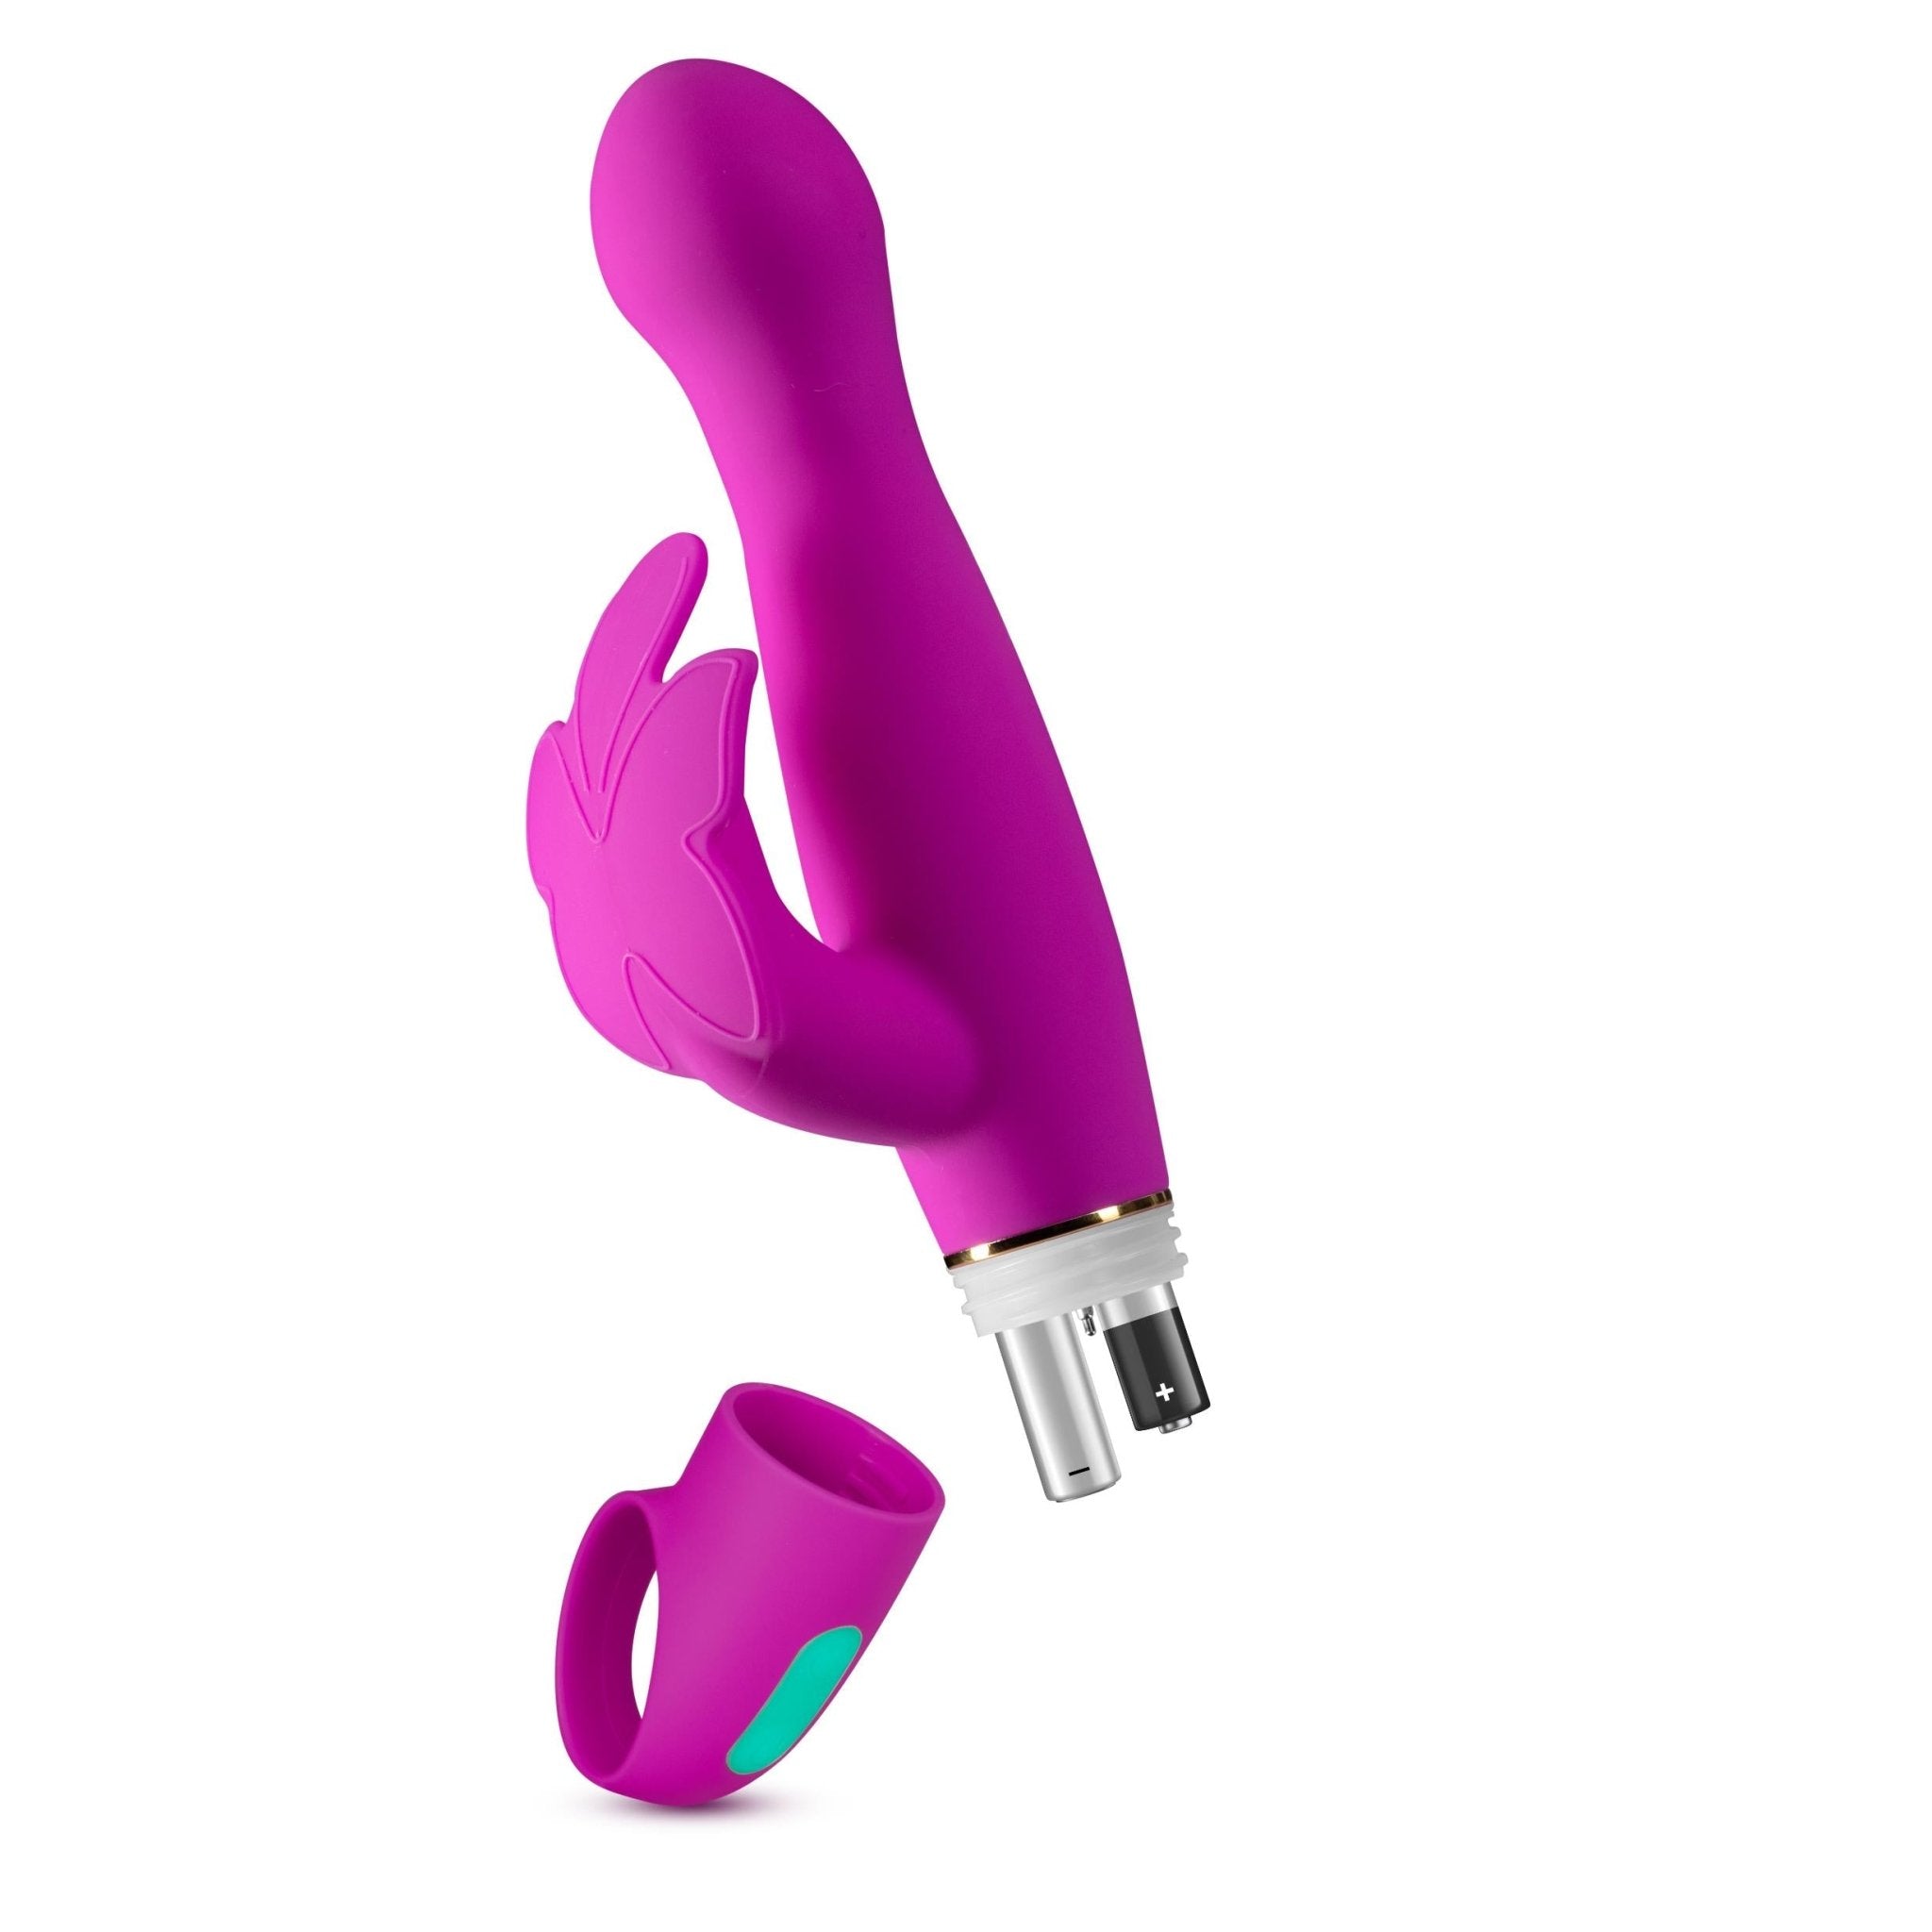 Aria Naughty AF - Powerful G-Spot Vibrator by Blush